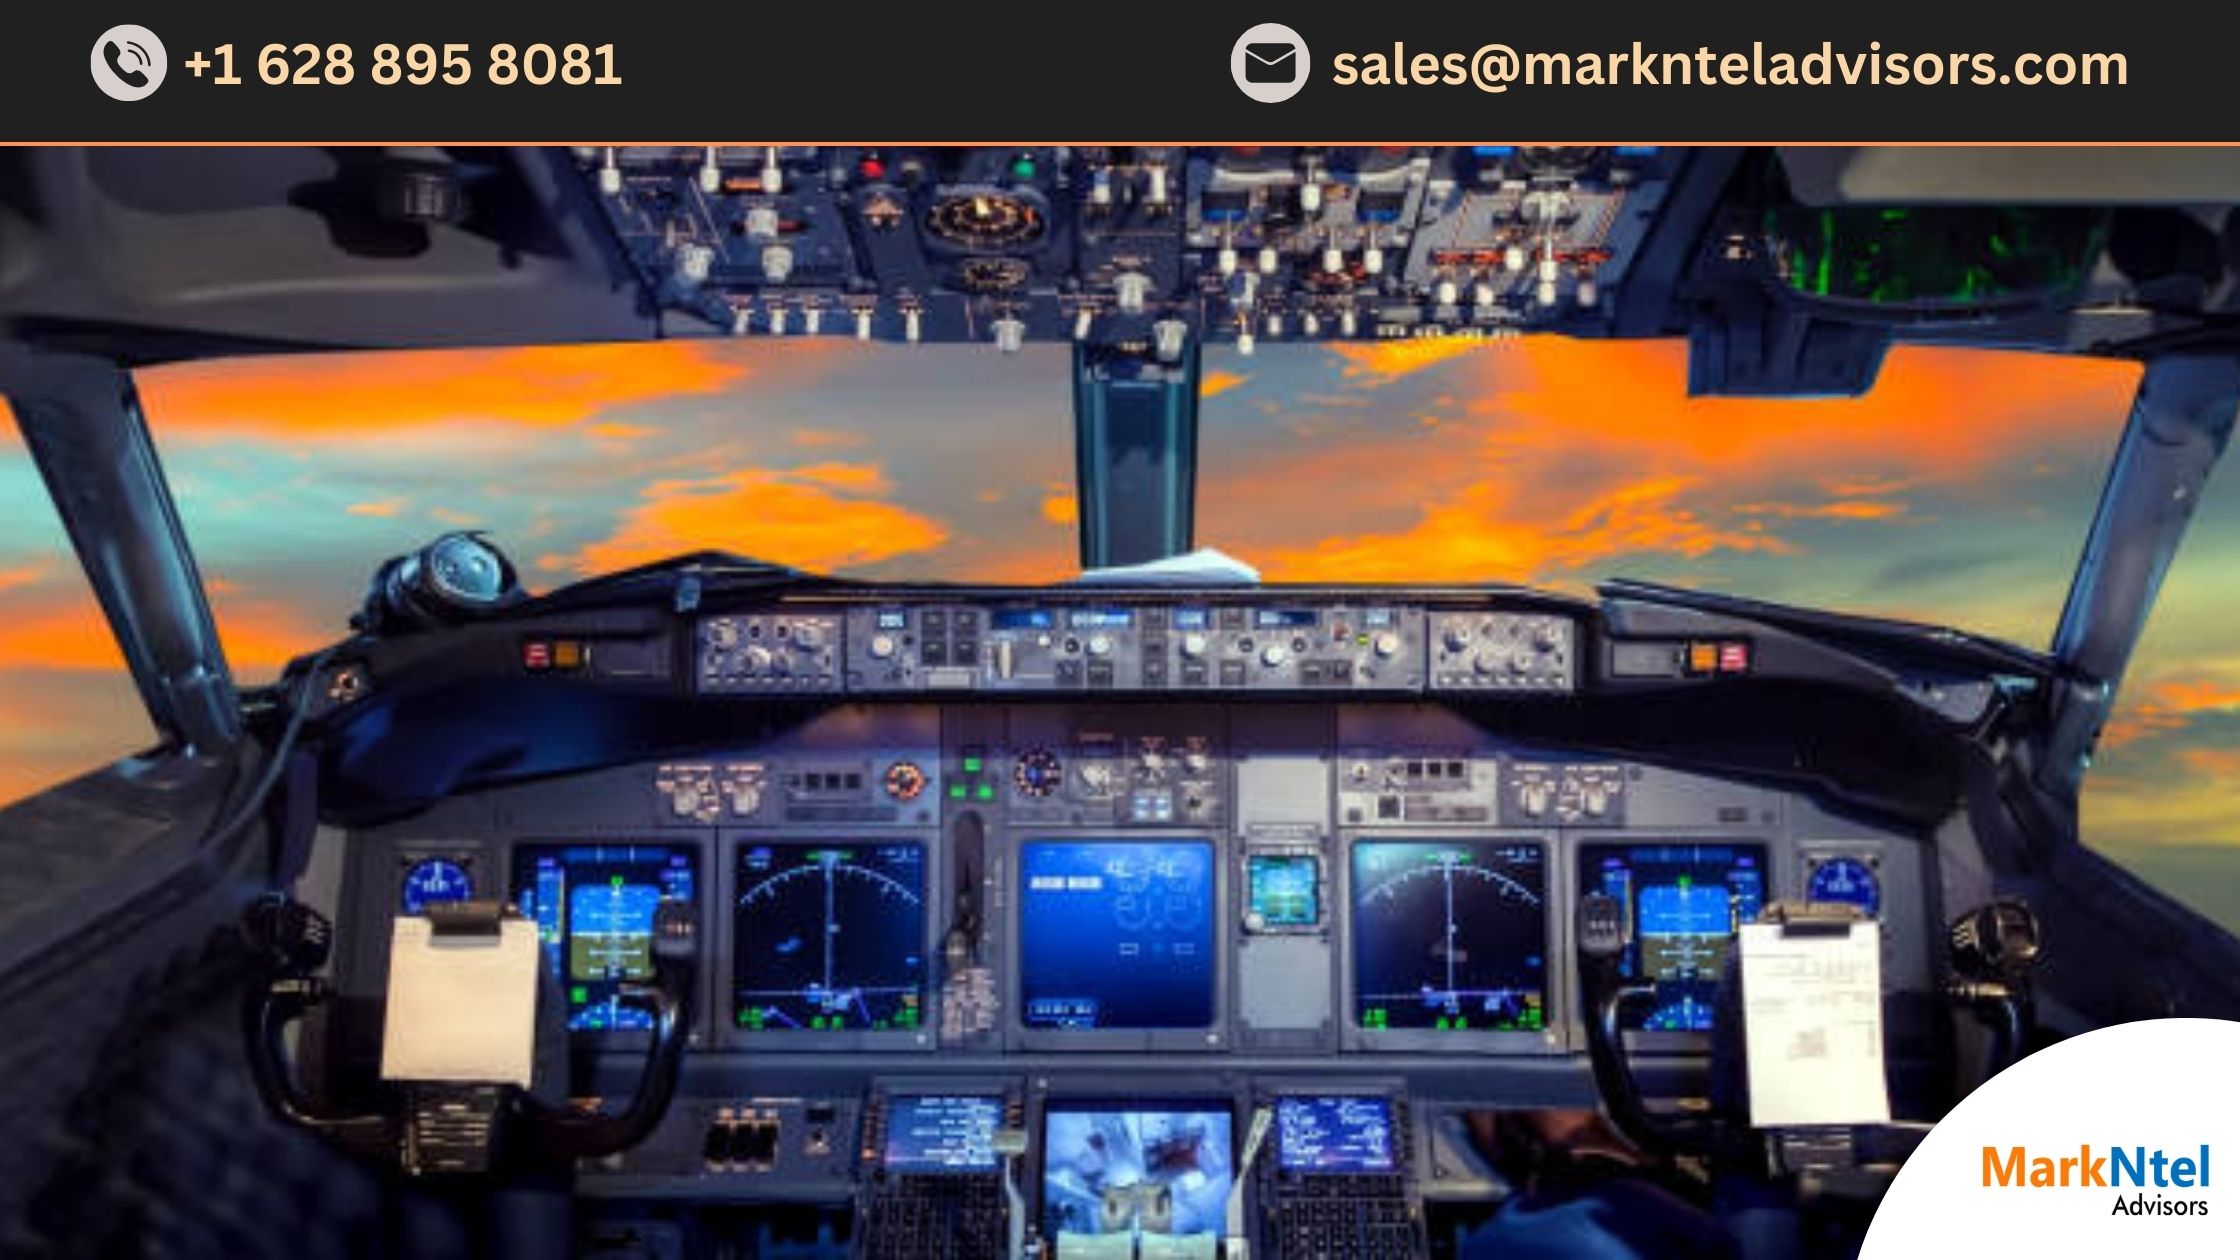 Aircraft Digital Cockpit Market: Size, Share, Demand, Latest Trends, and Investment Opportunity 2022-2027